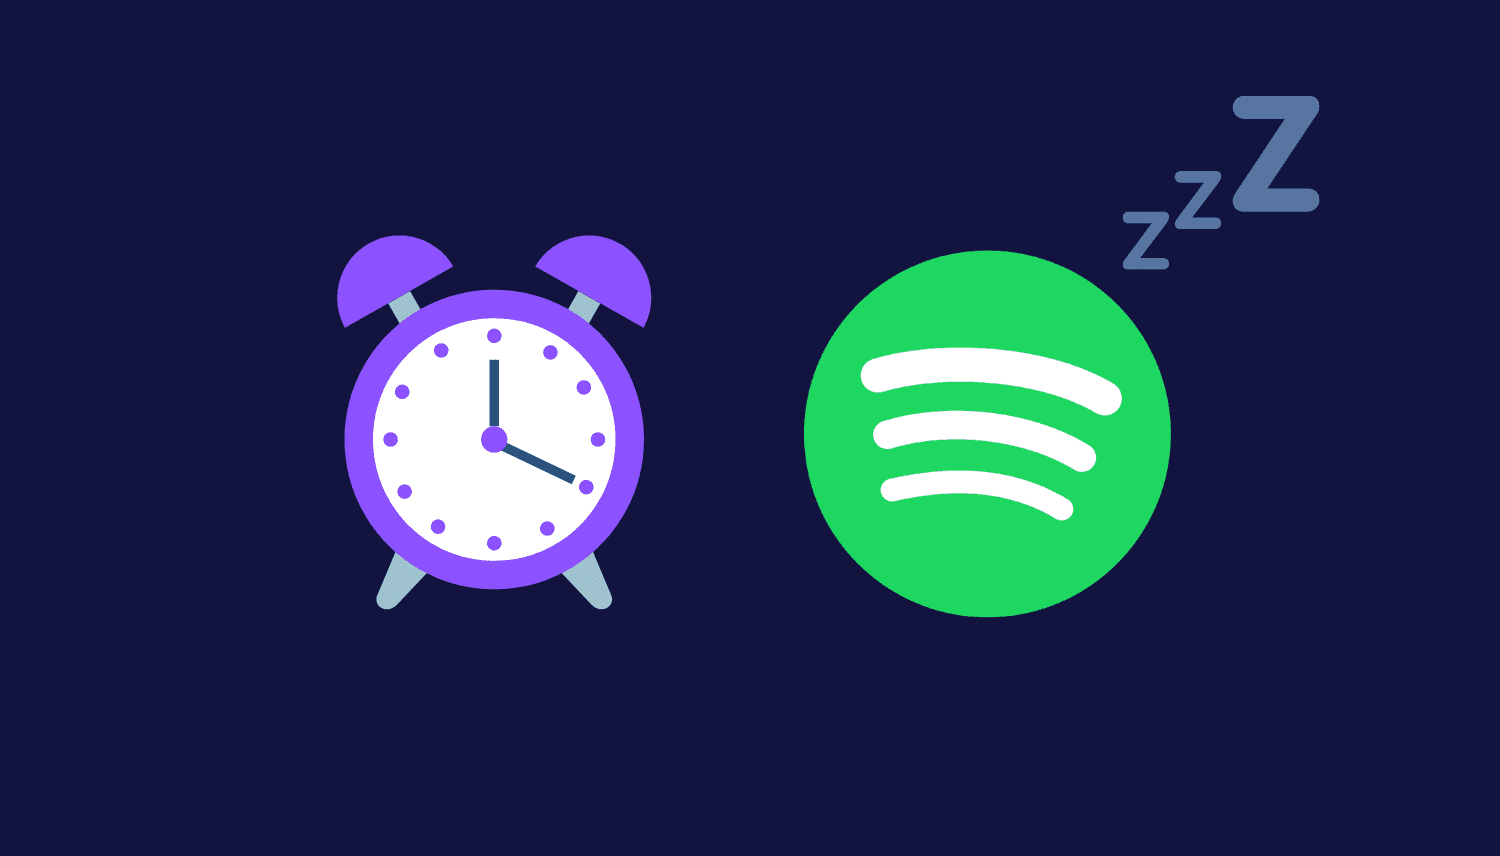 Set sleep timer in Spotify on iPhone